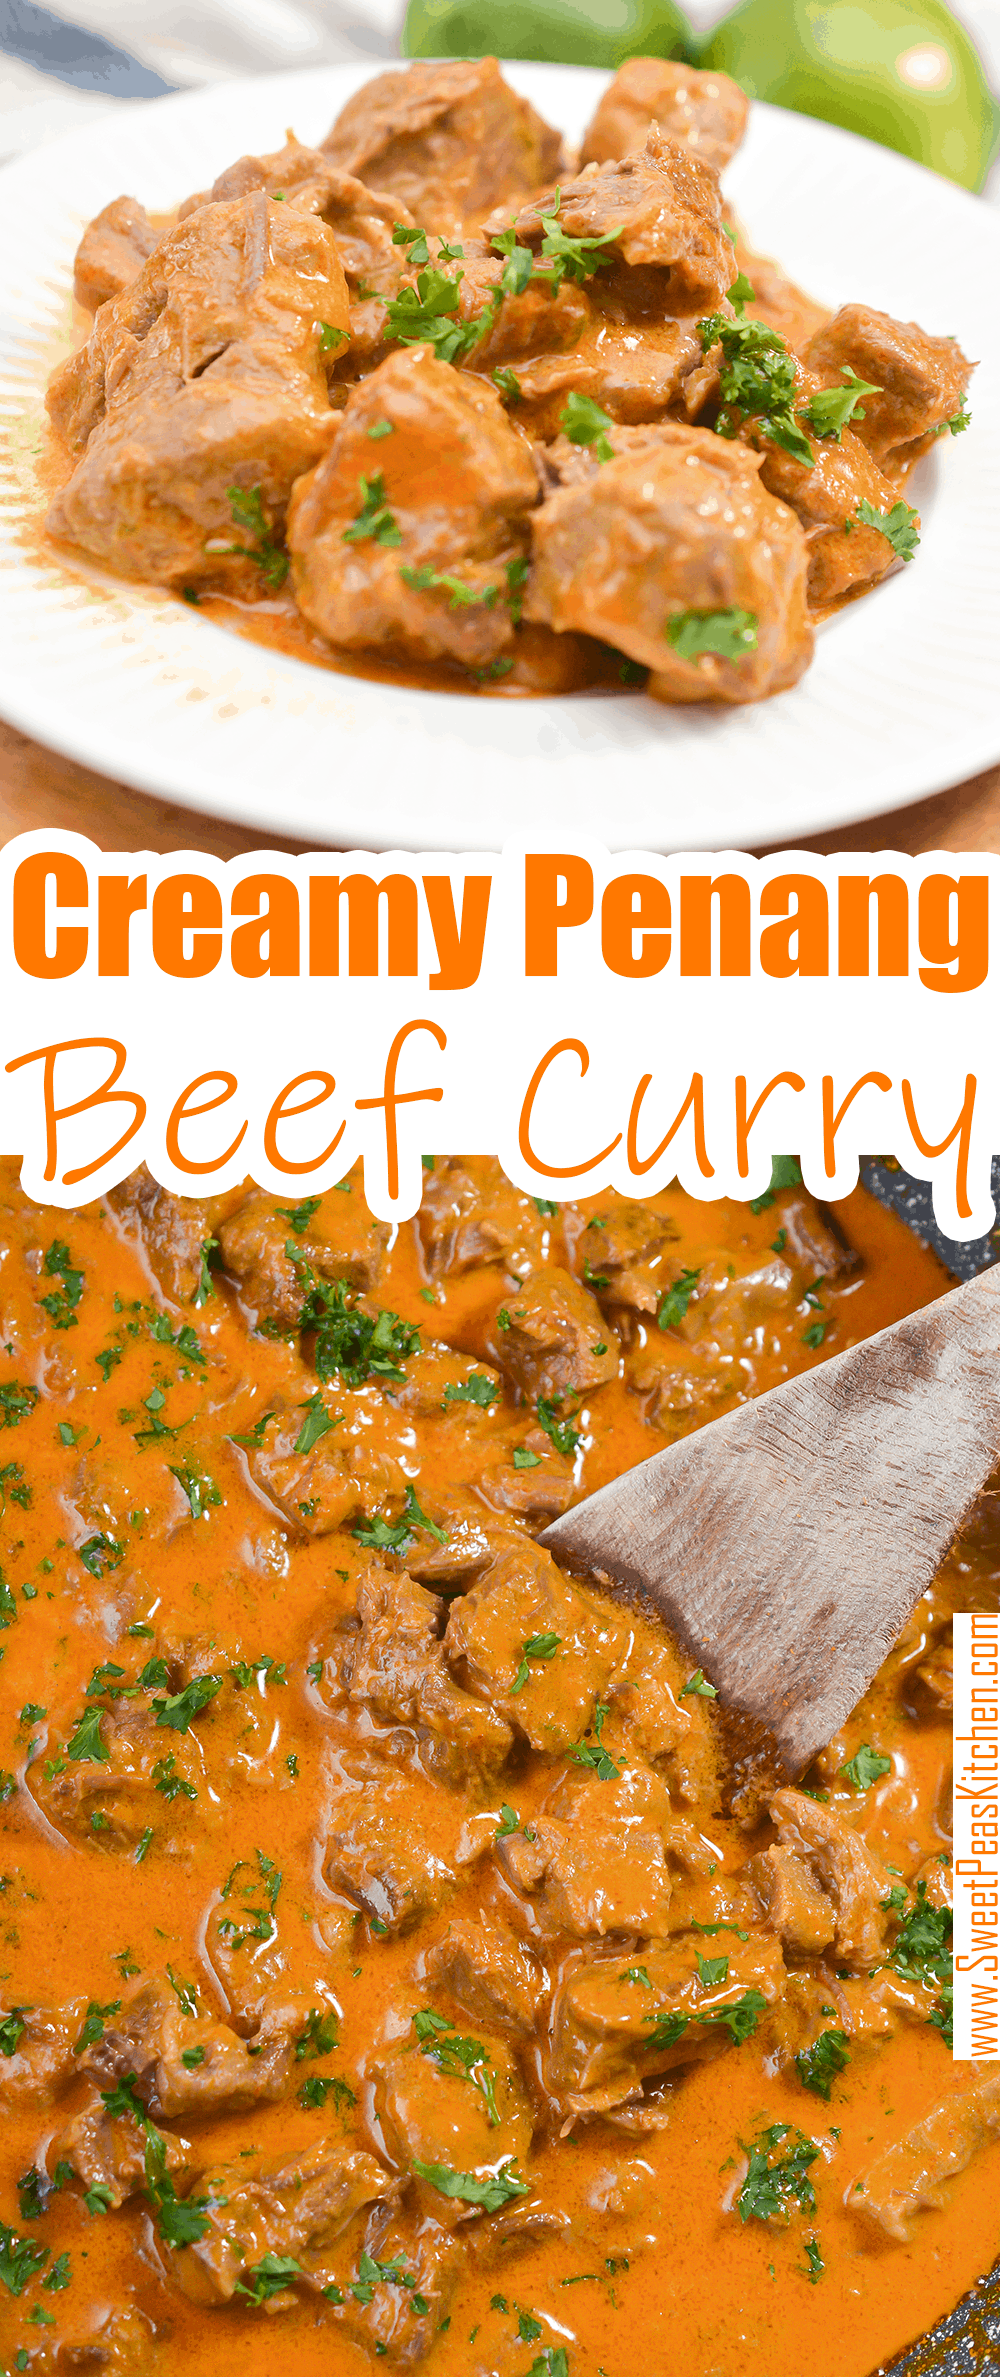 Penang Beef Curry